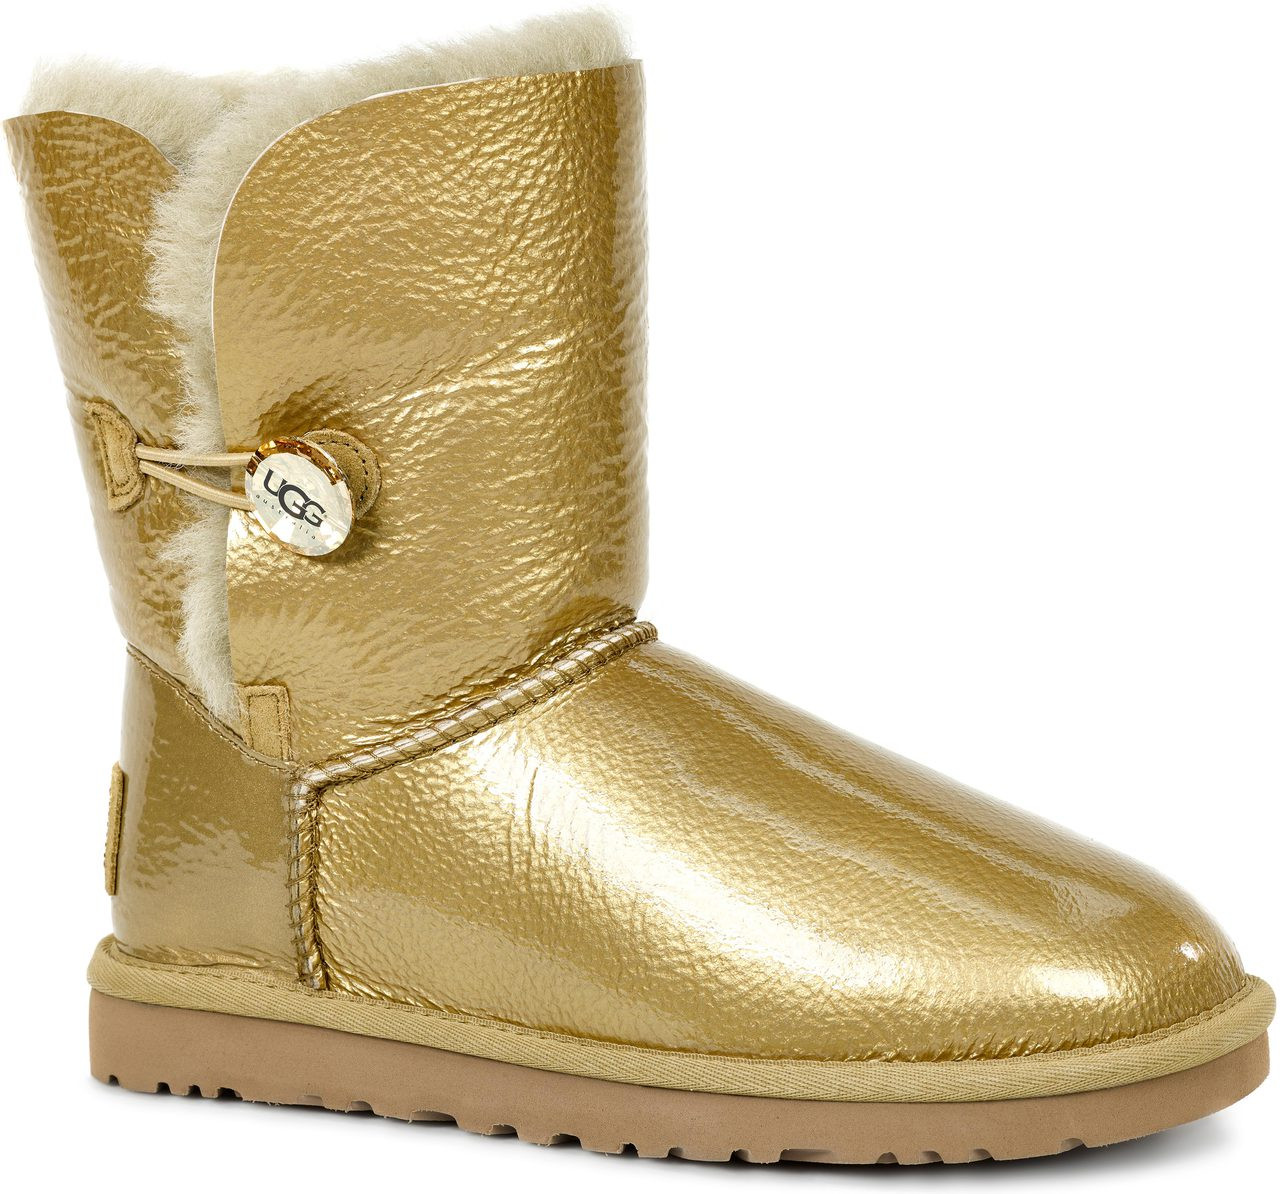 gold ugg boots Cheaper Than Retail 